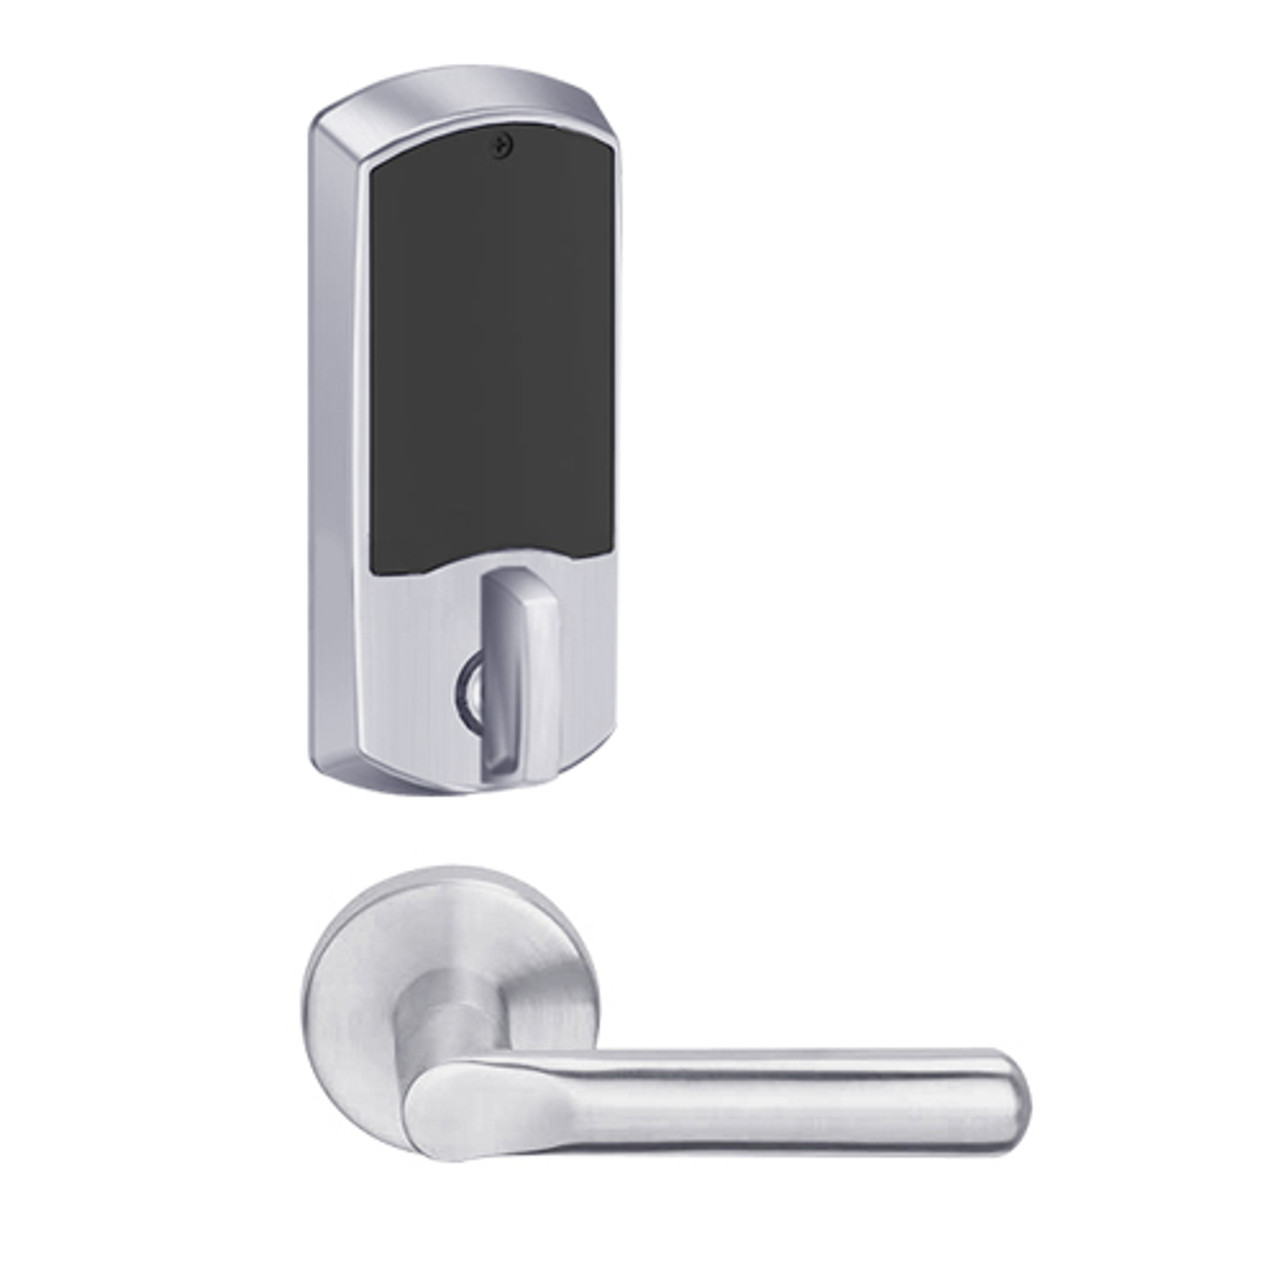 LEMD-GRW-BD-18-626-00B Schlage Privacy/Apartment Wireless Greenwich Mortise Deadbolt Lock with LED and 18 Lever Prepped for SFIC in Satin Chrome